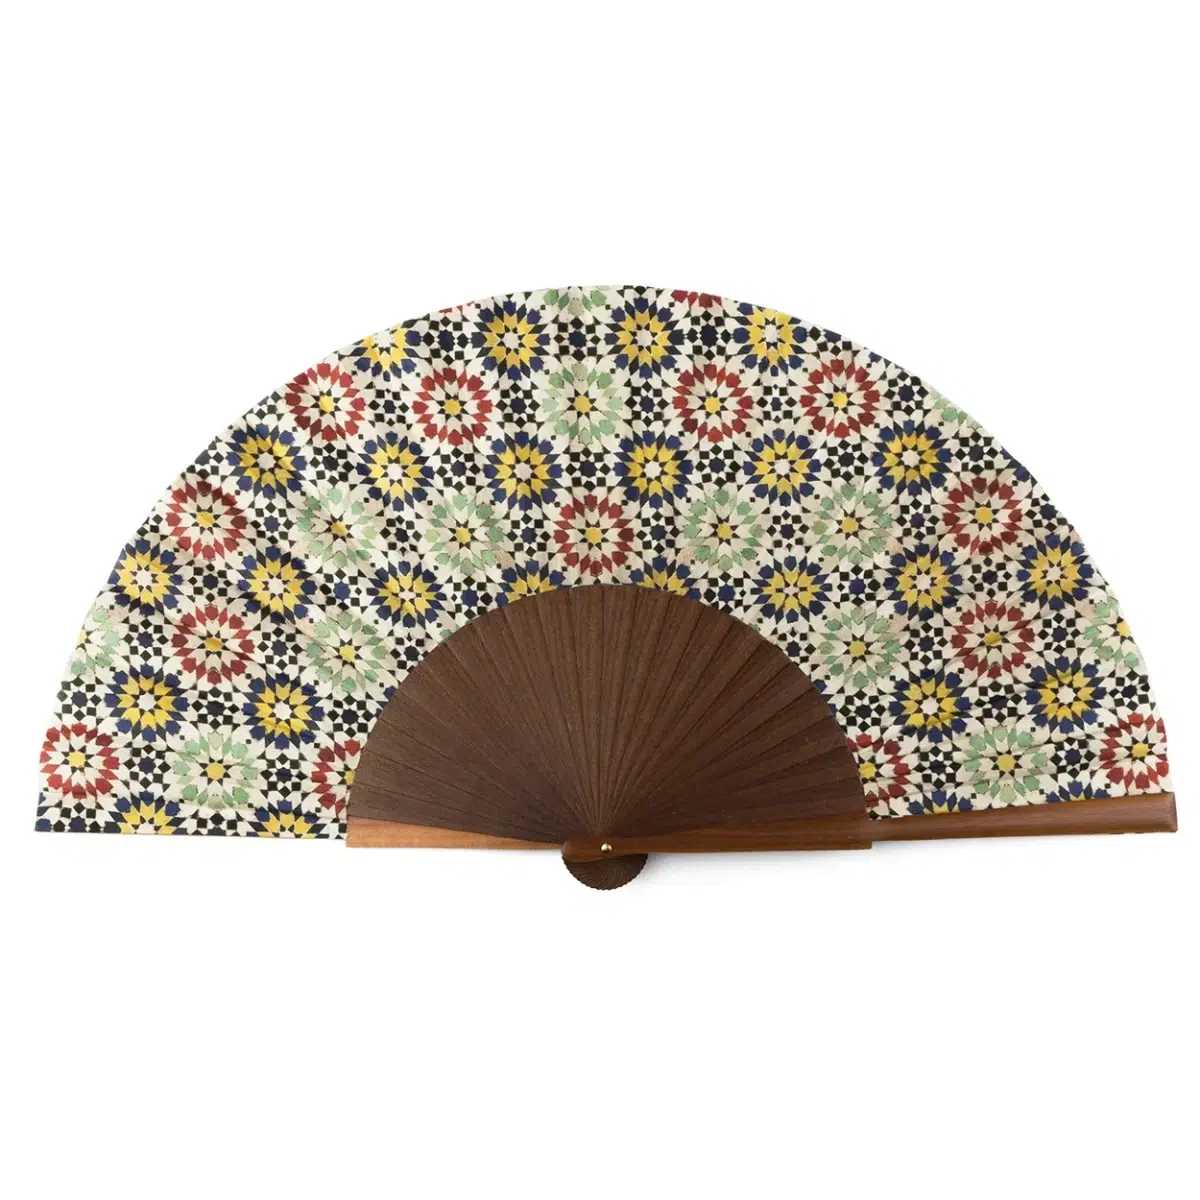 Handcrafted Silk Fan with Multicolored Print Inspired by Islamic Art